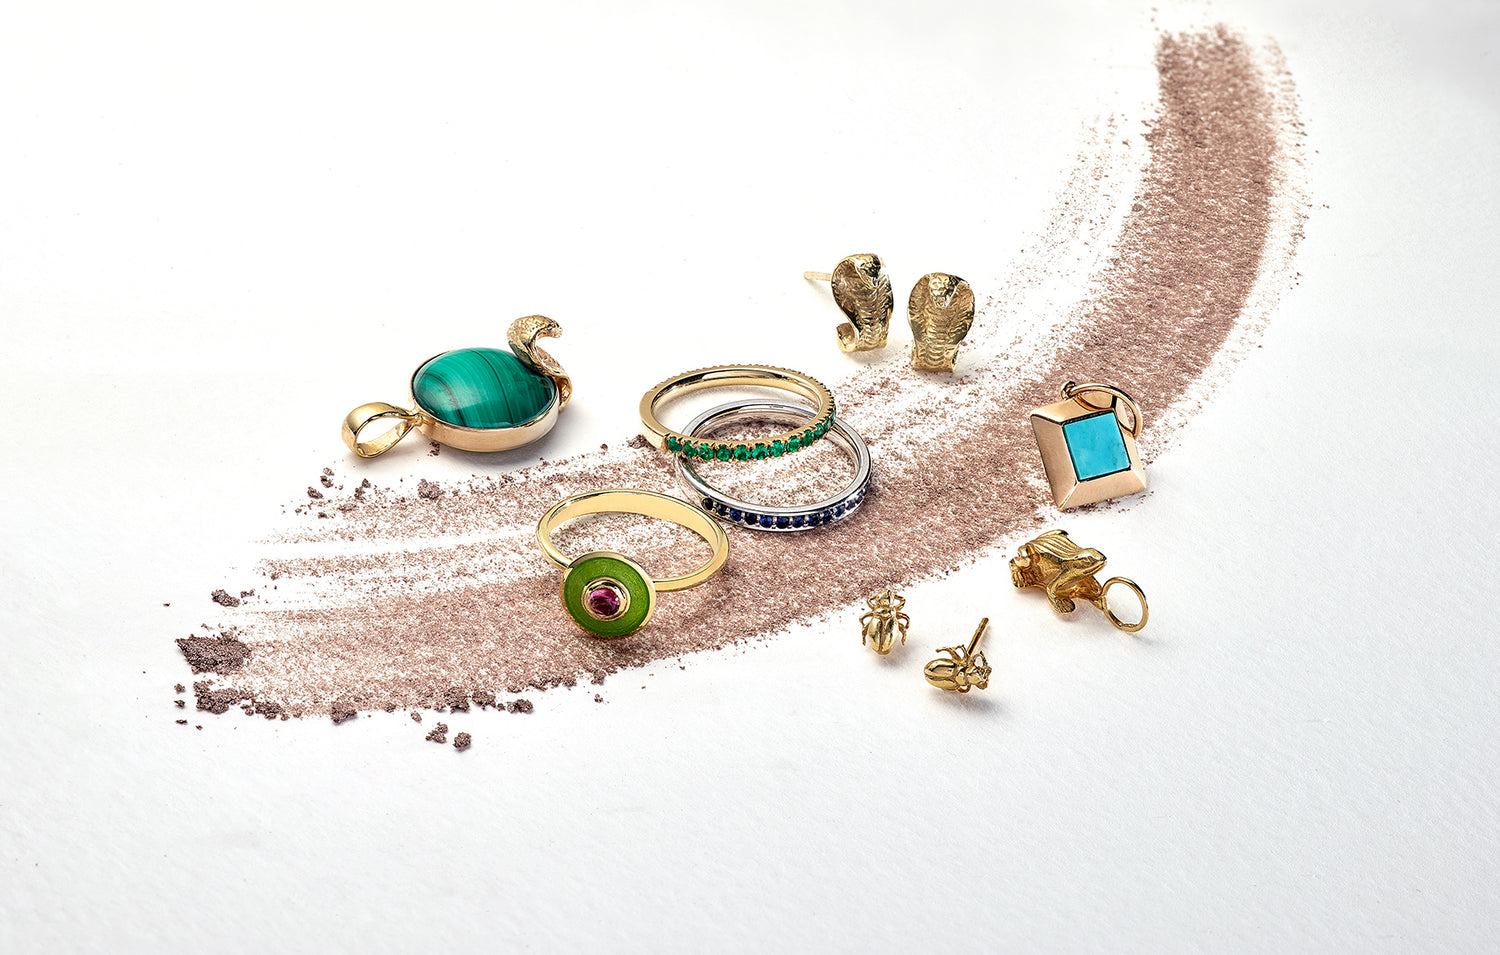 Jewellery design London, a collection of the Egyptian jewellery, frog for fertility, scarabs for rebirth, cobras for protection, and a turquoise pendant which is the outline of a Egyptian Pyramid.  Two eternity bands in Emeralds and Sapphire and one ity bity aurora vitreous enamel and pink tourmaline ring. 